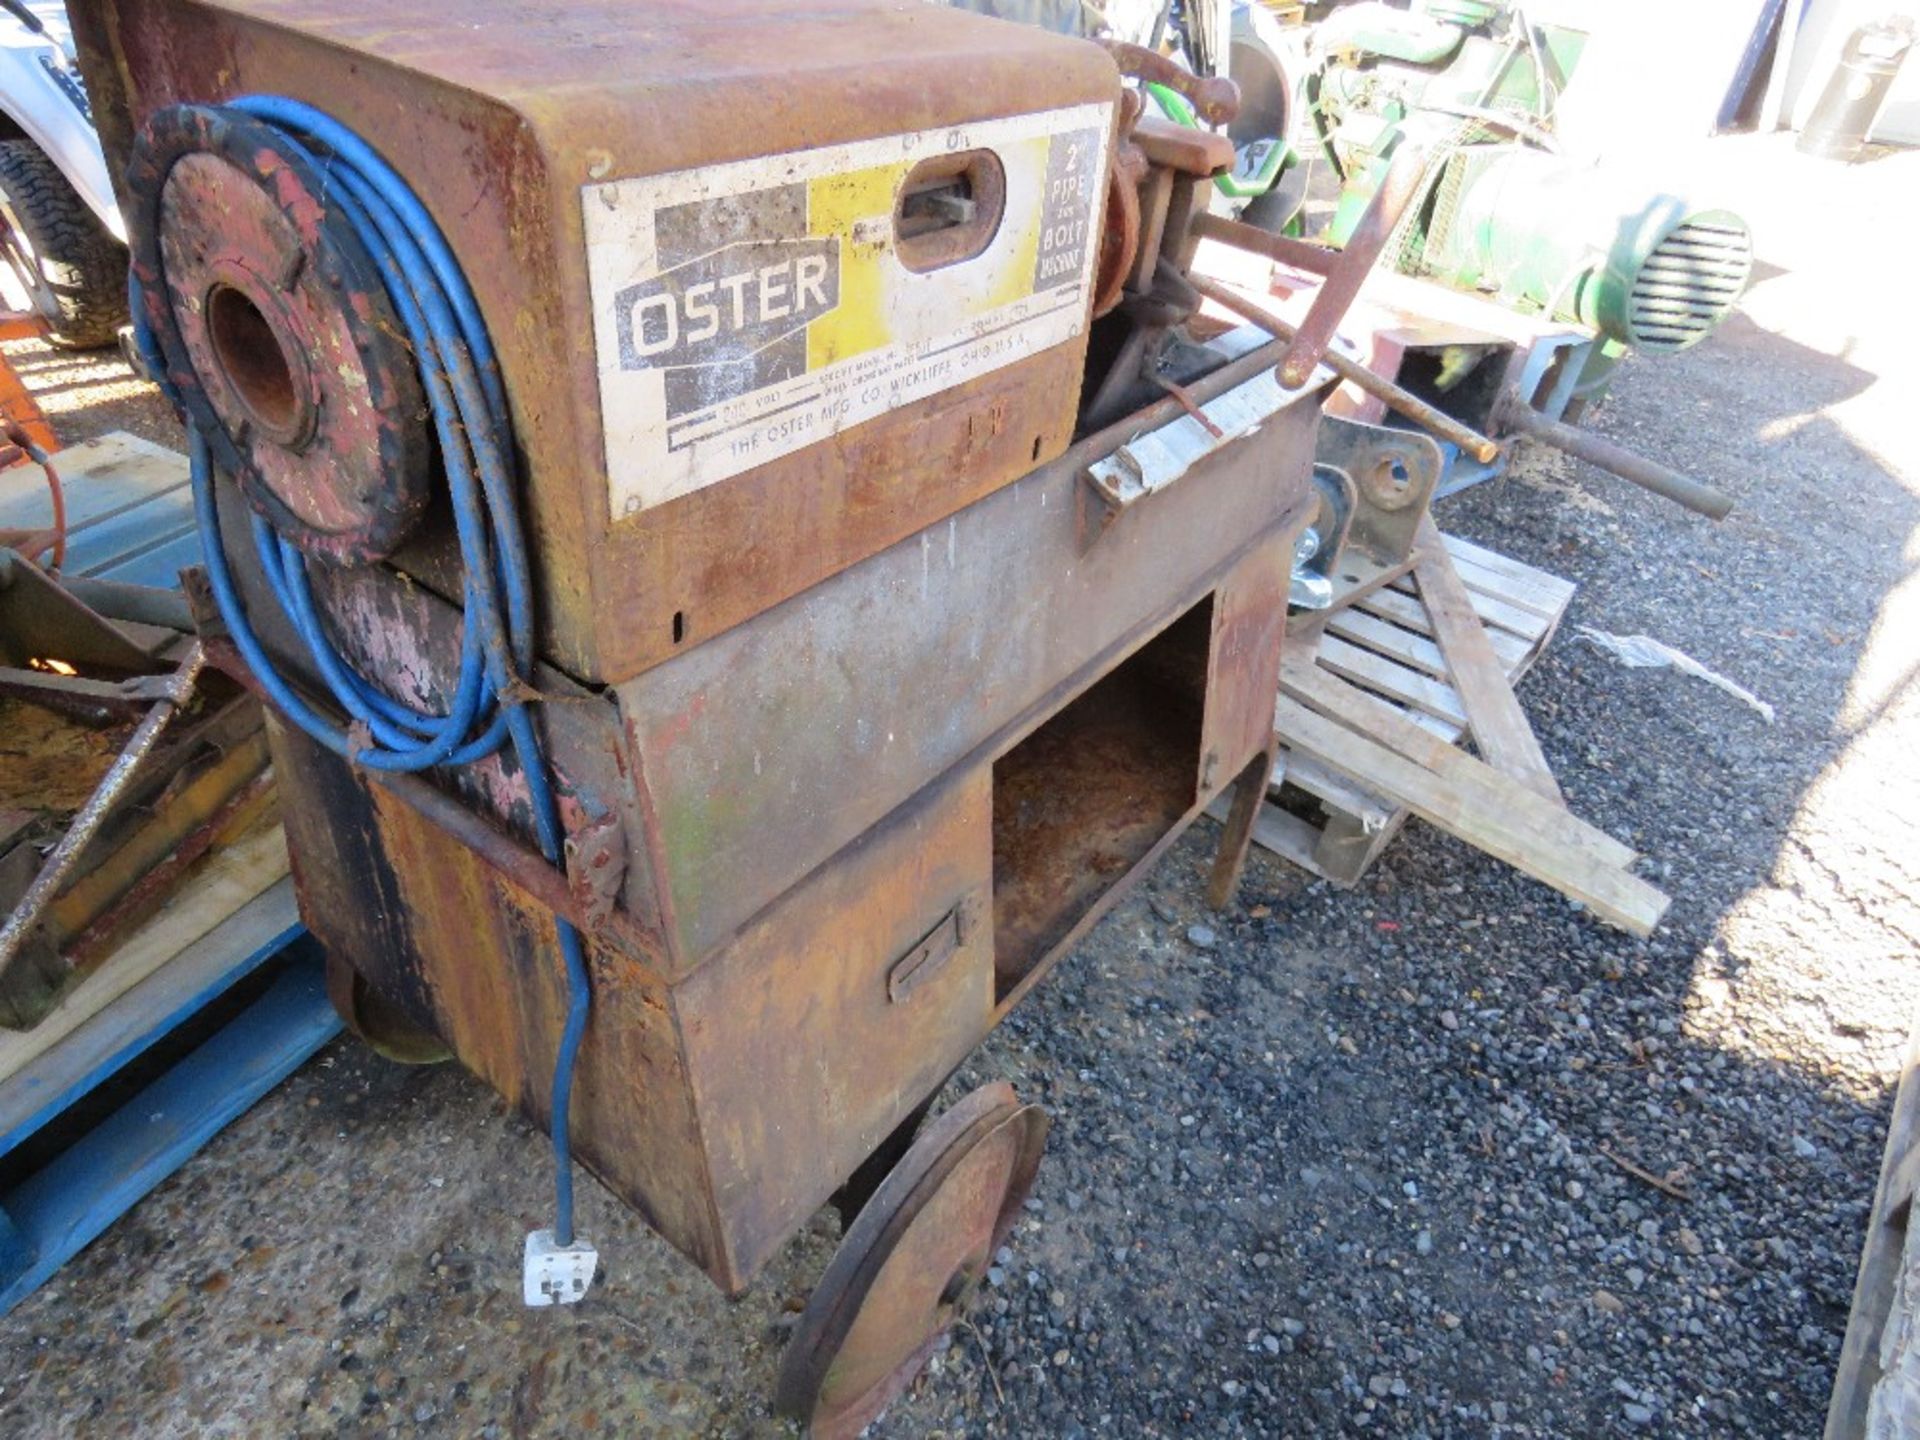 2 X OSTER ELECTRIC PIPE THREADERS. CONDITION UNKNOWN. HAVE BEEN STORED OUTSIDE. - Image 5 of 7